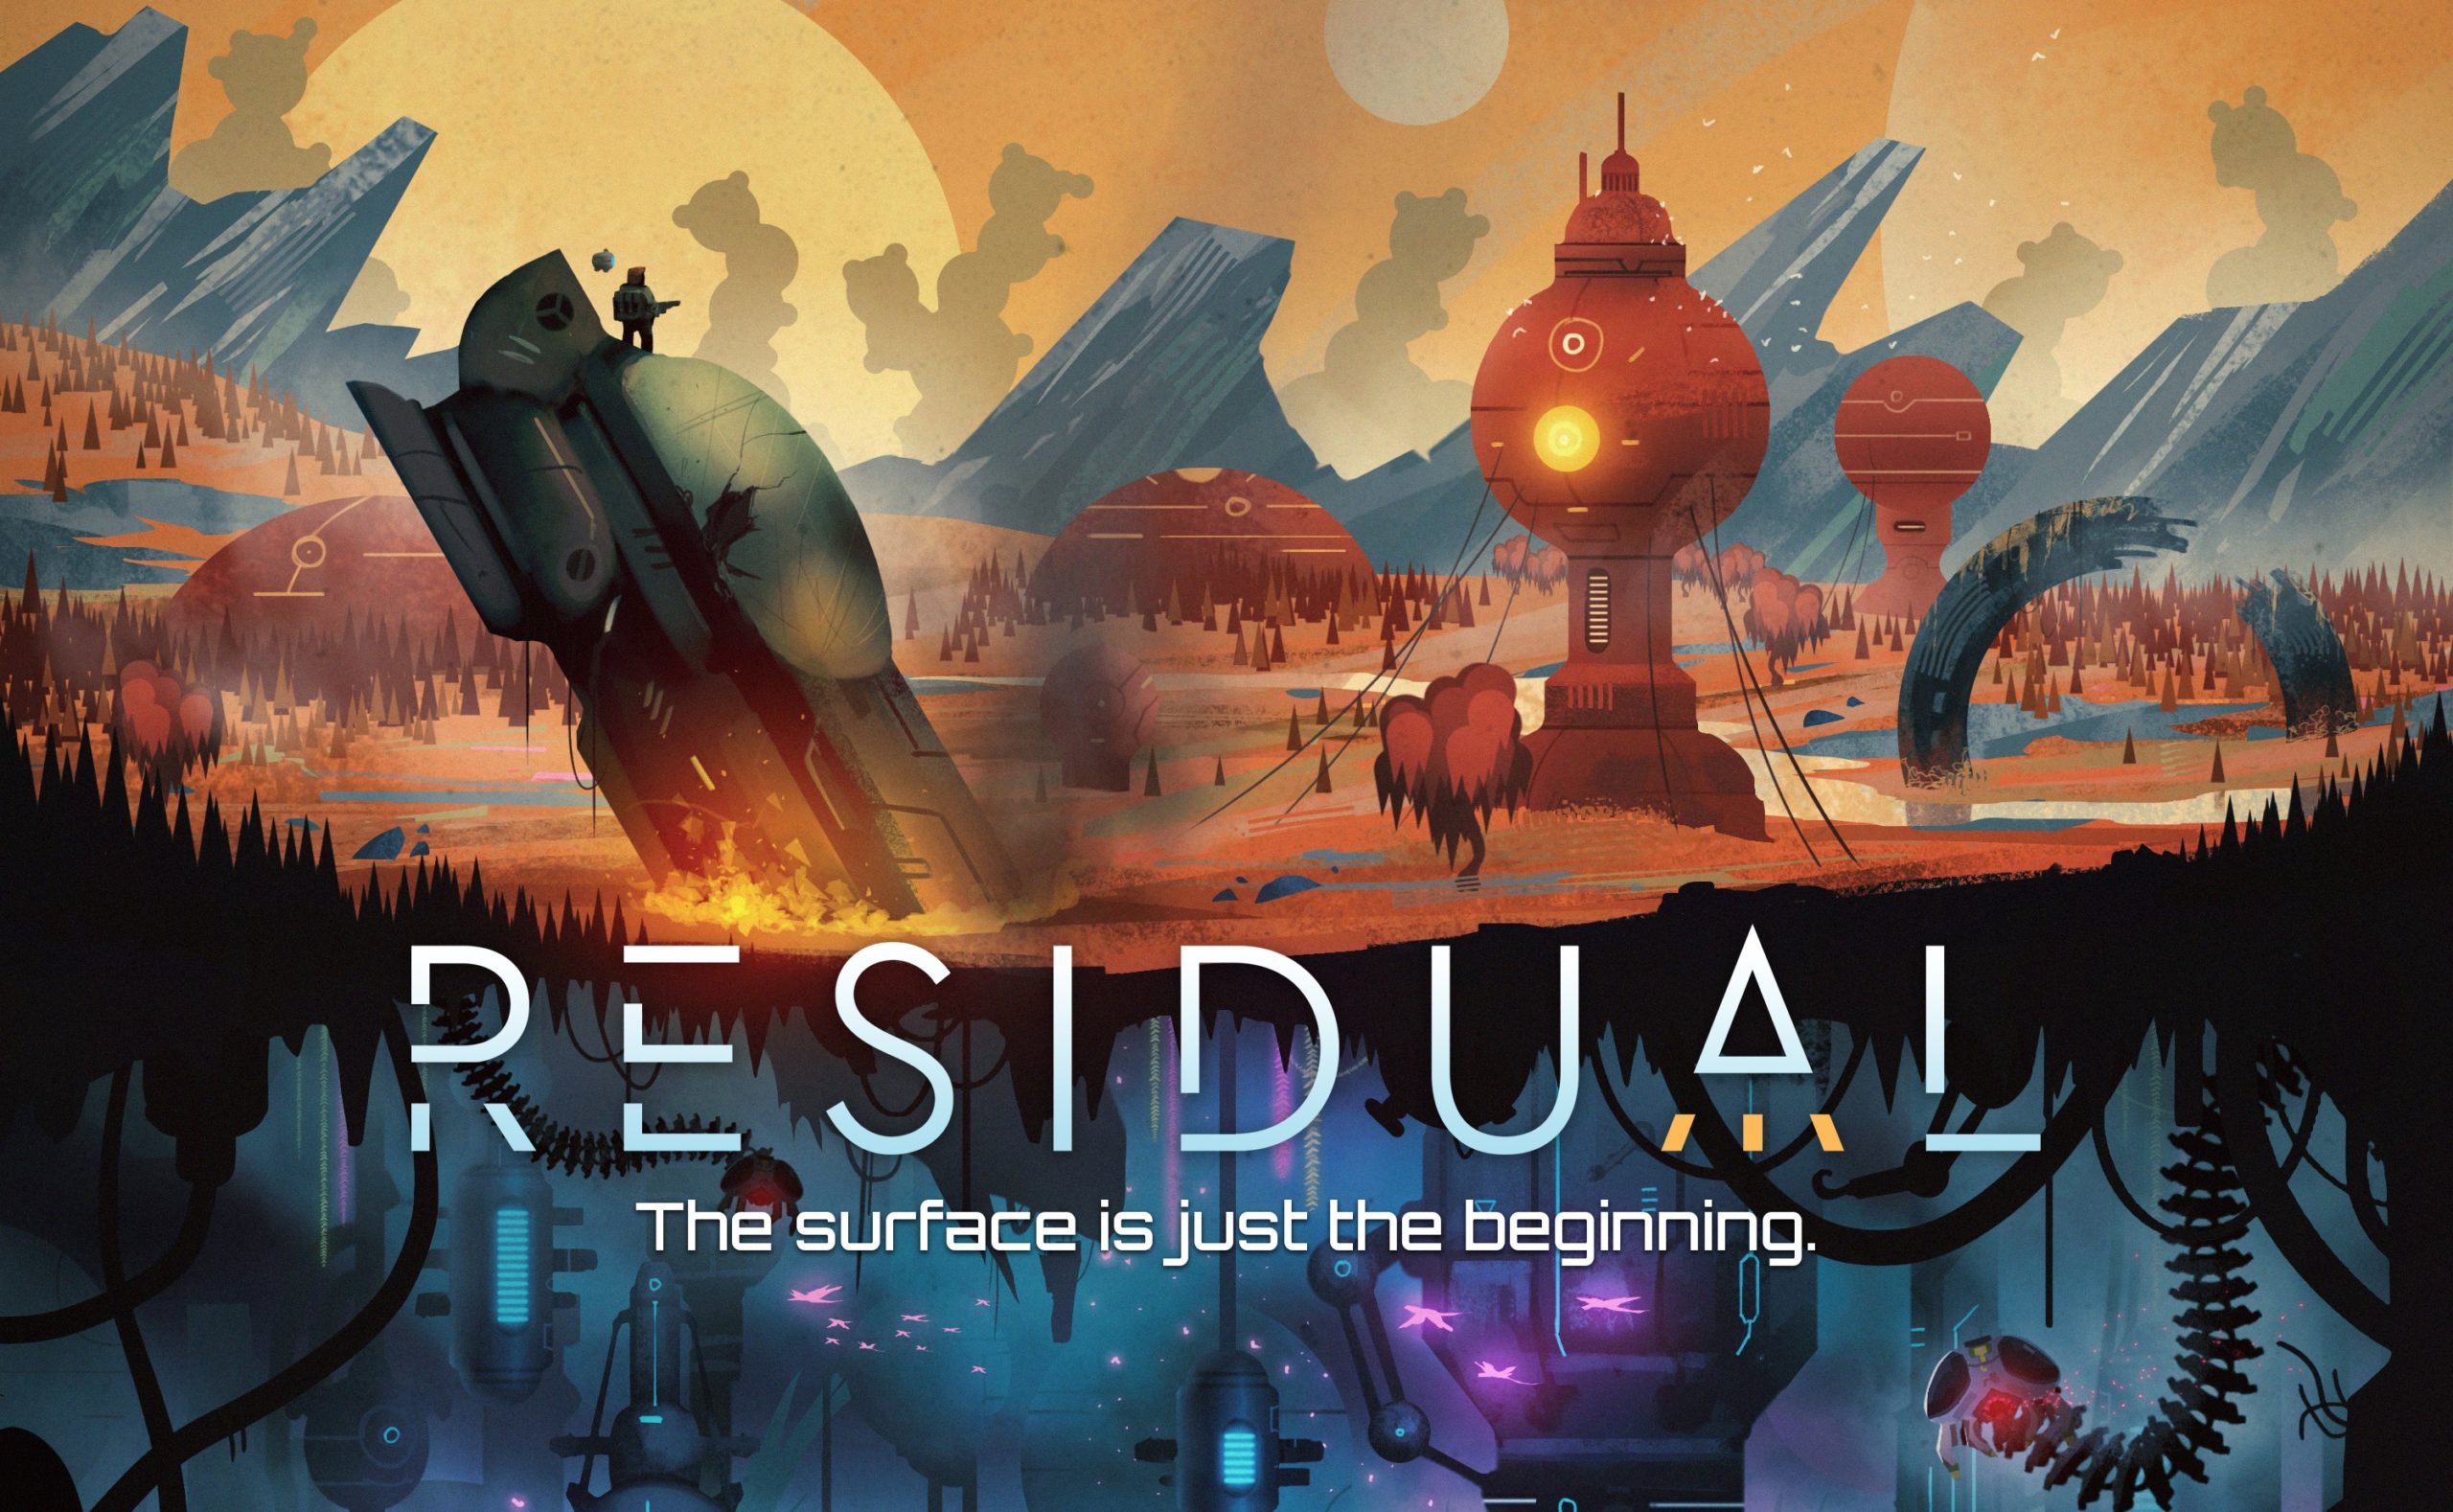 Residual (Switch) Review – Your stamina is low